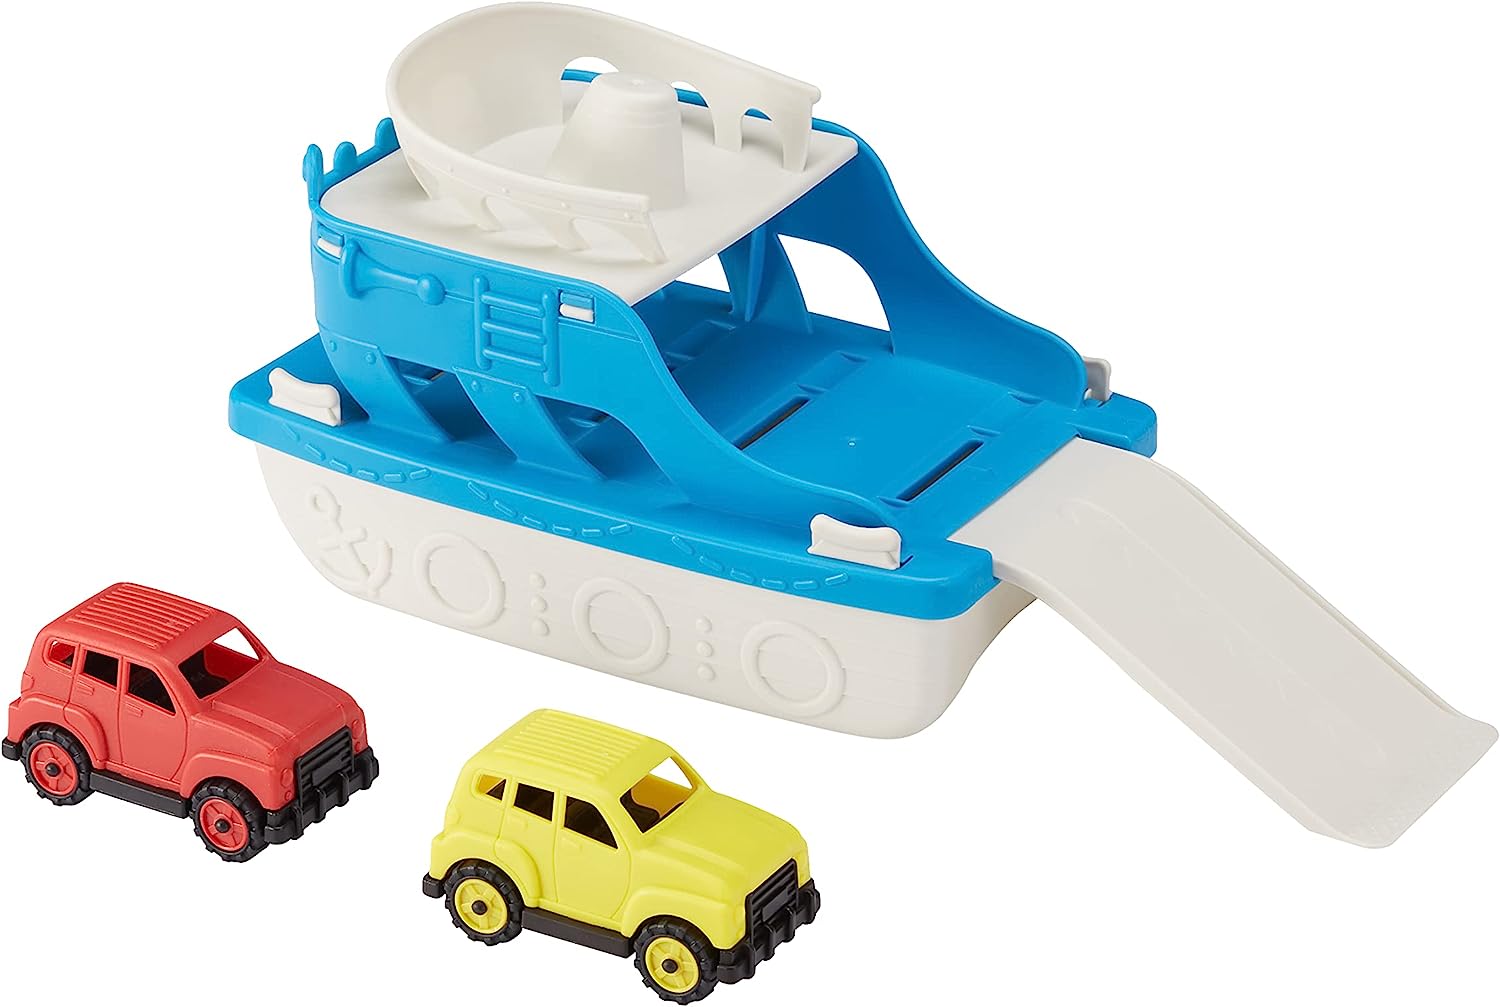 Amazon Basics Ferry Boat with 2 Mini Cars Bathtub Toy for Kids Ages 2+ (Blue) $5.70 + FS w/ Prime or $25+